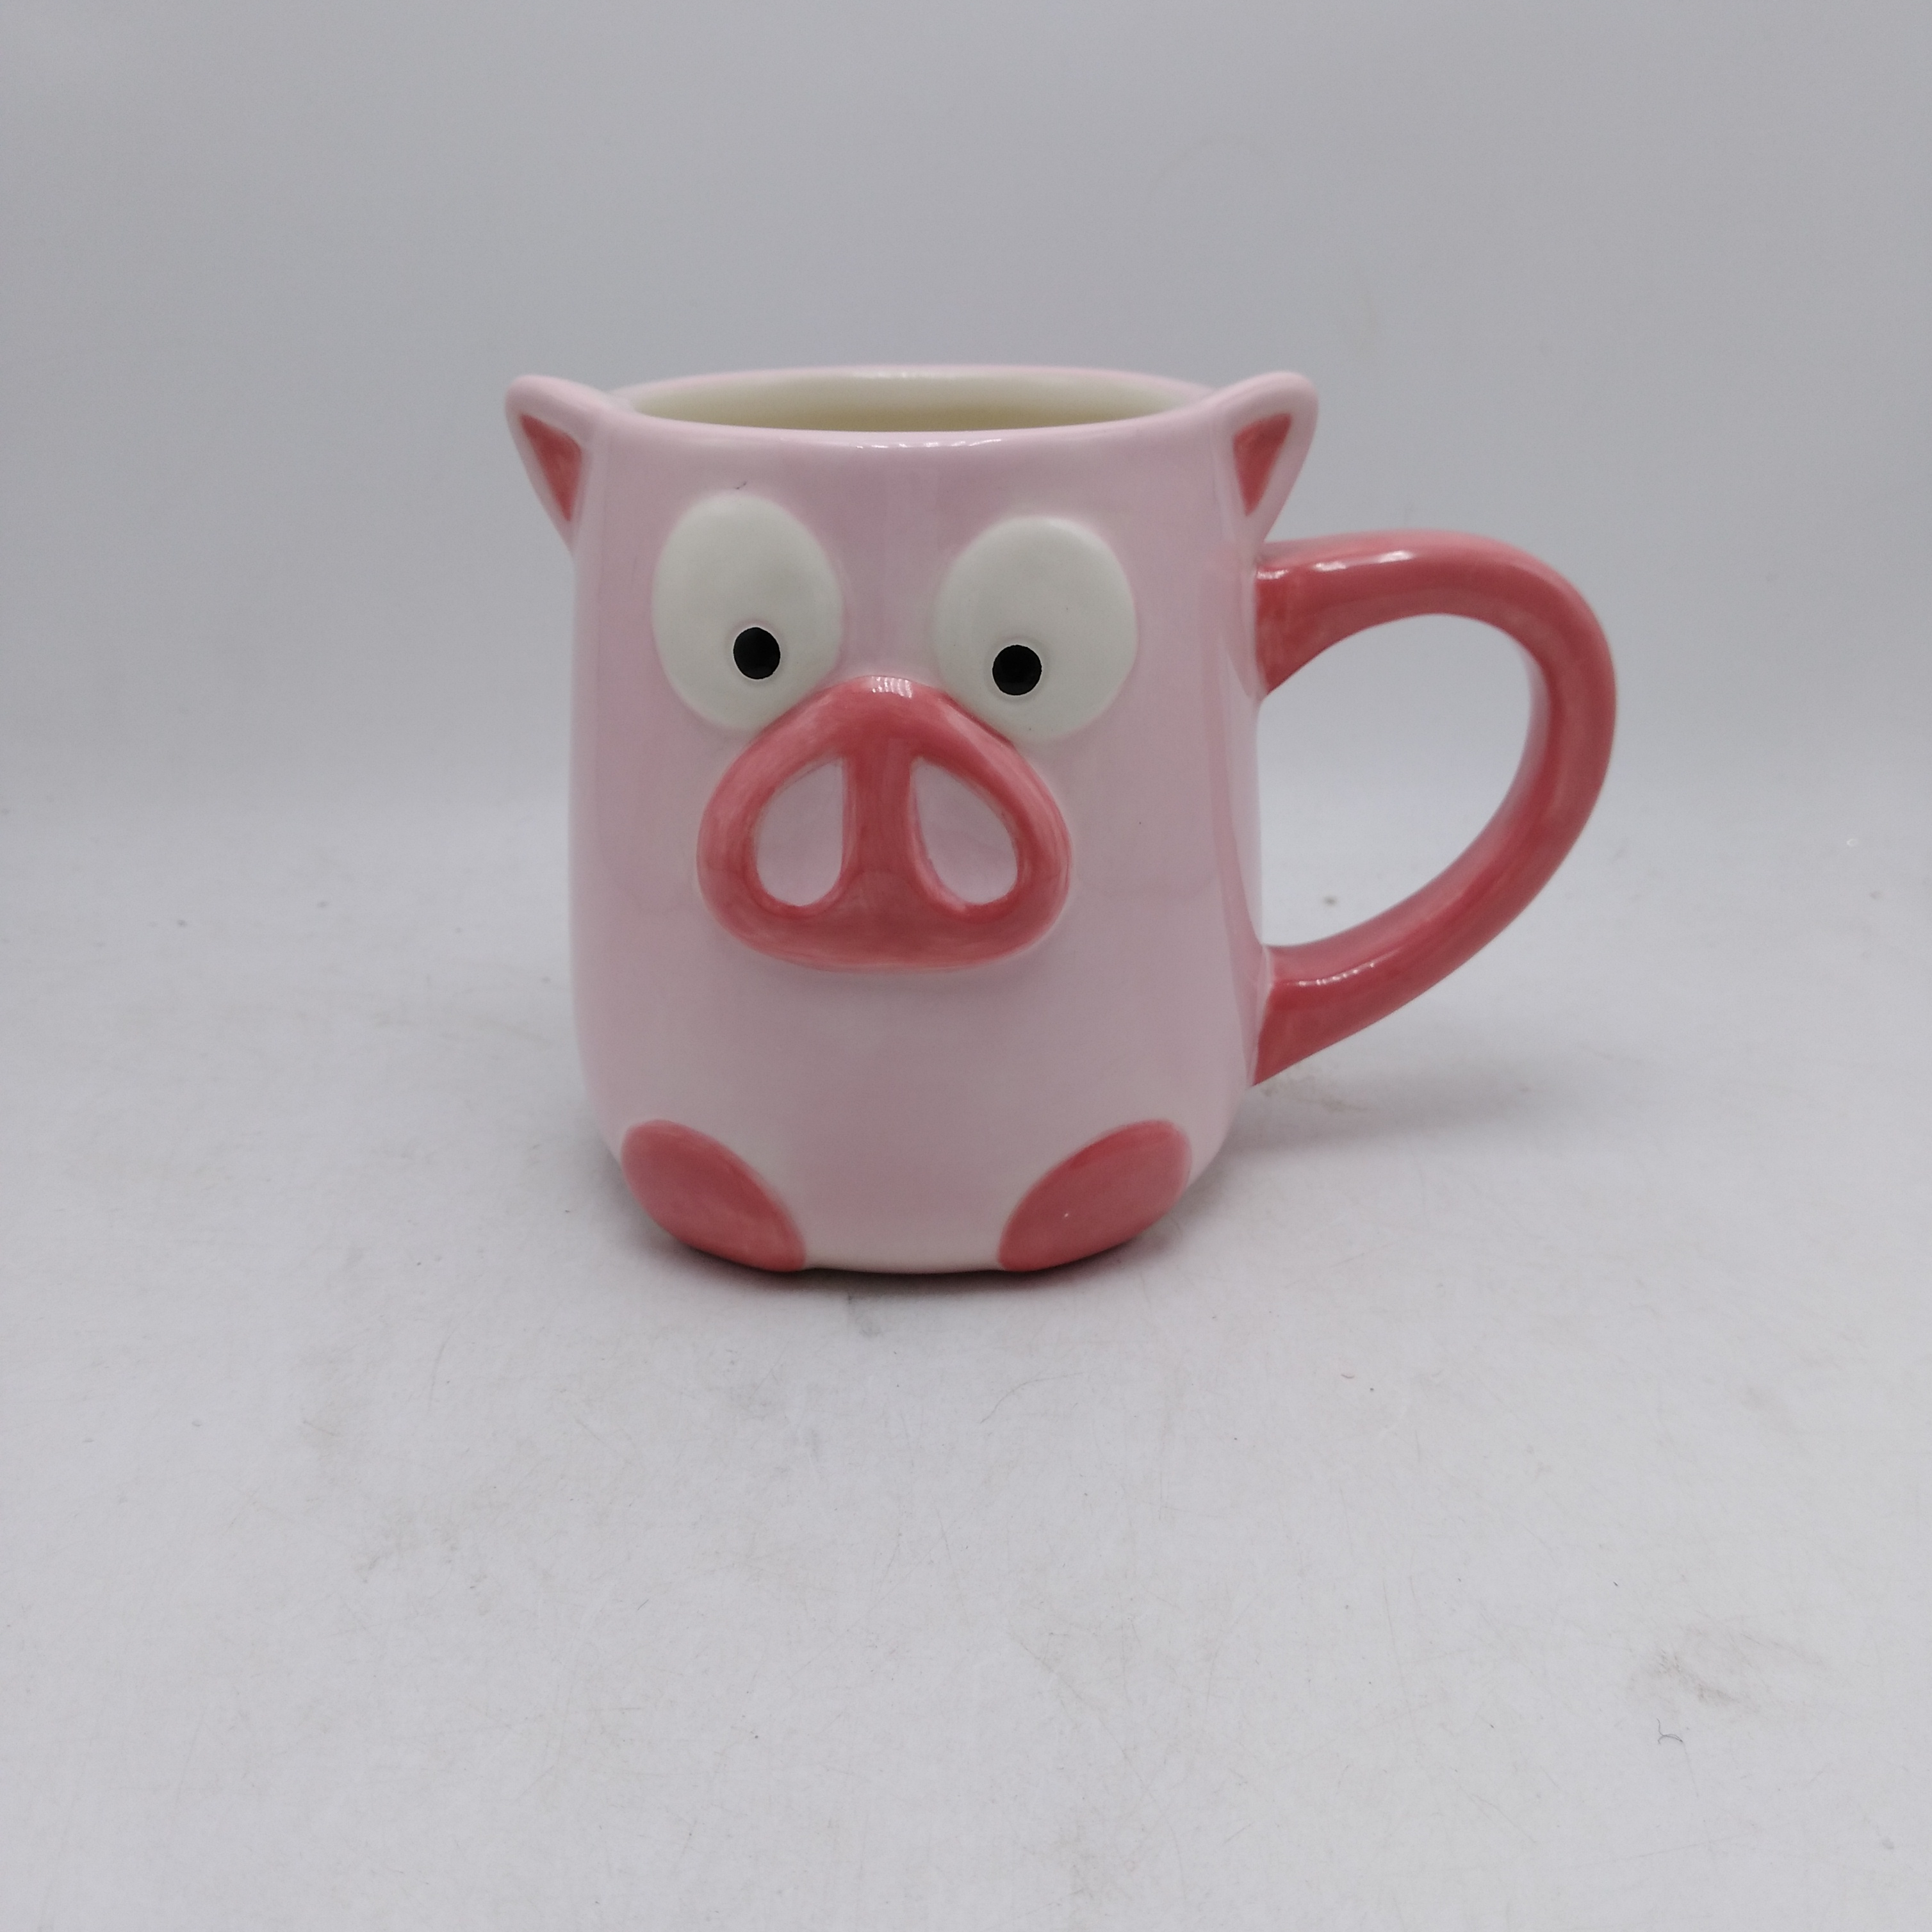 Ceramic Pink Pig Coffee Mug 3D Hand Painted Tea Cup With Handle Cute Gifts 450ml